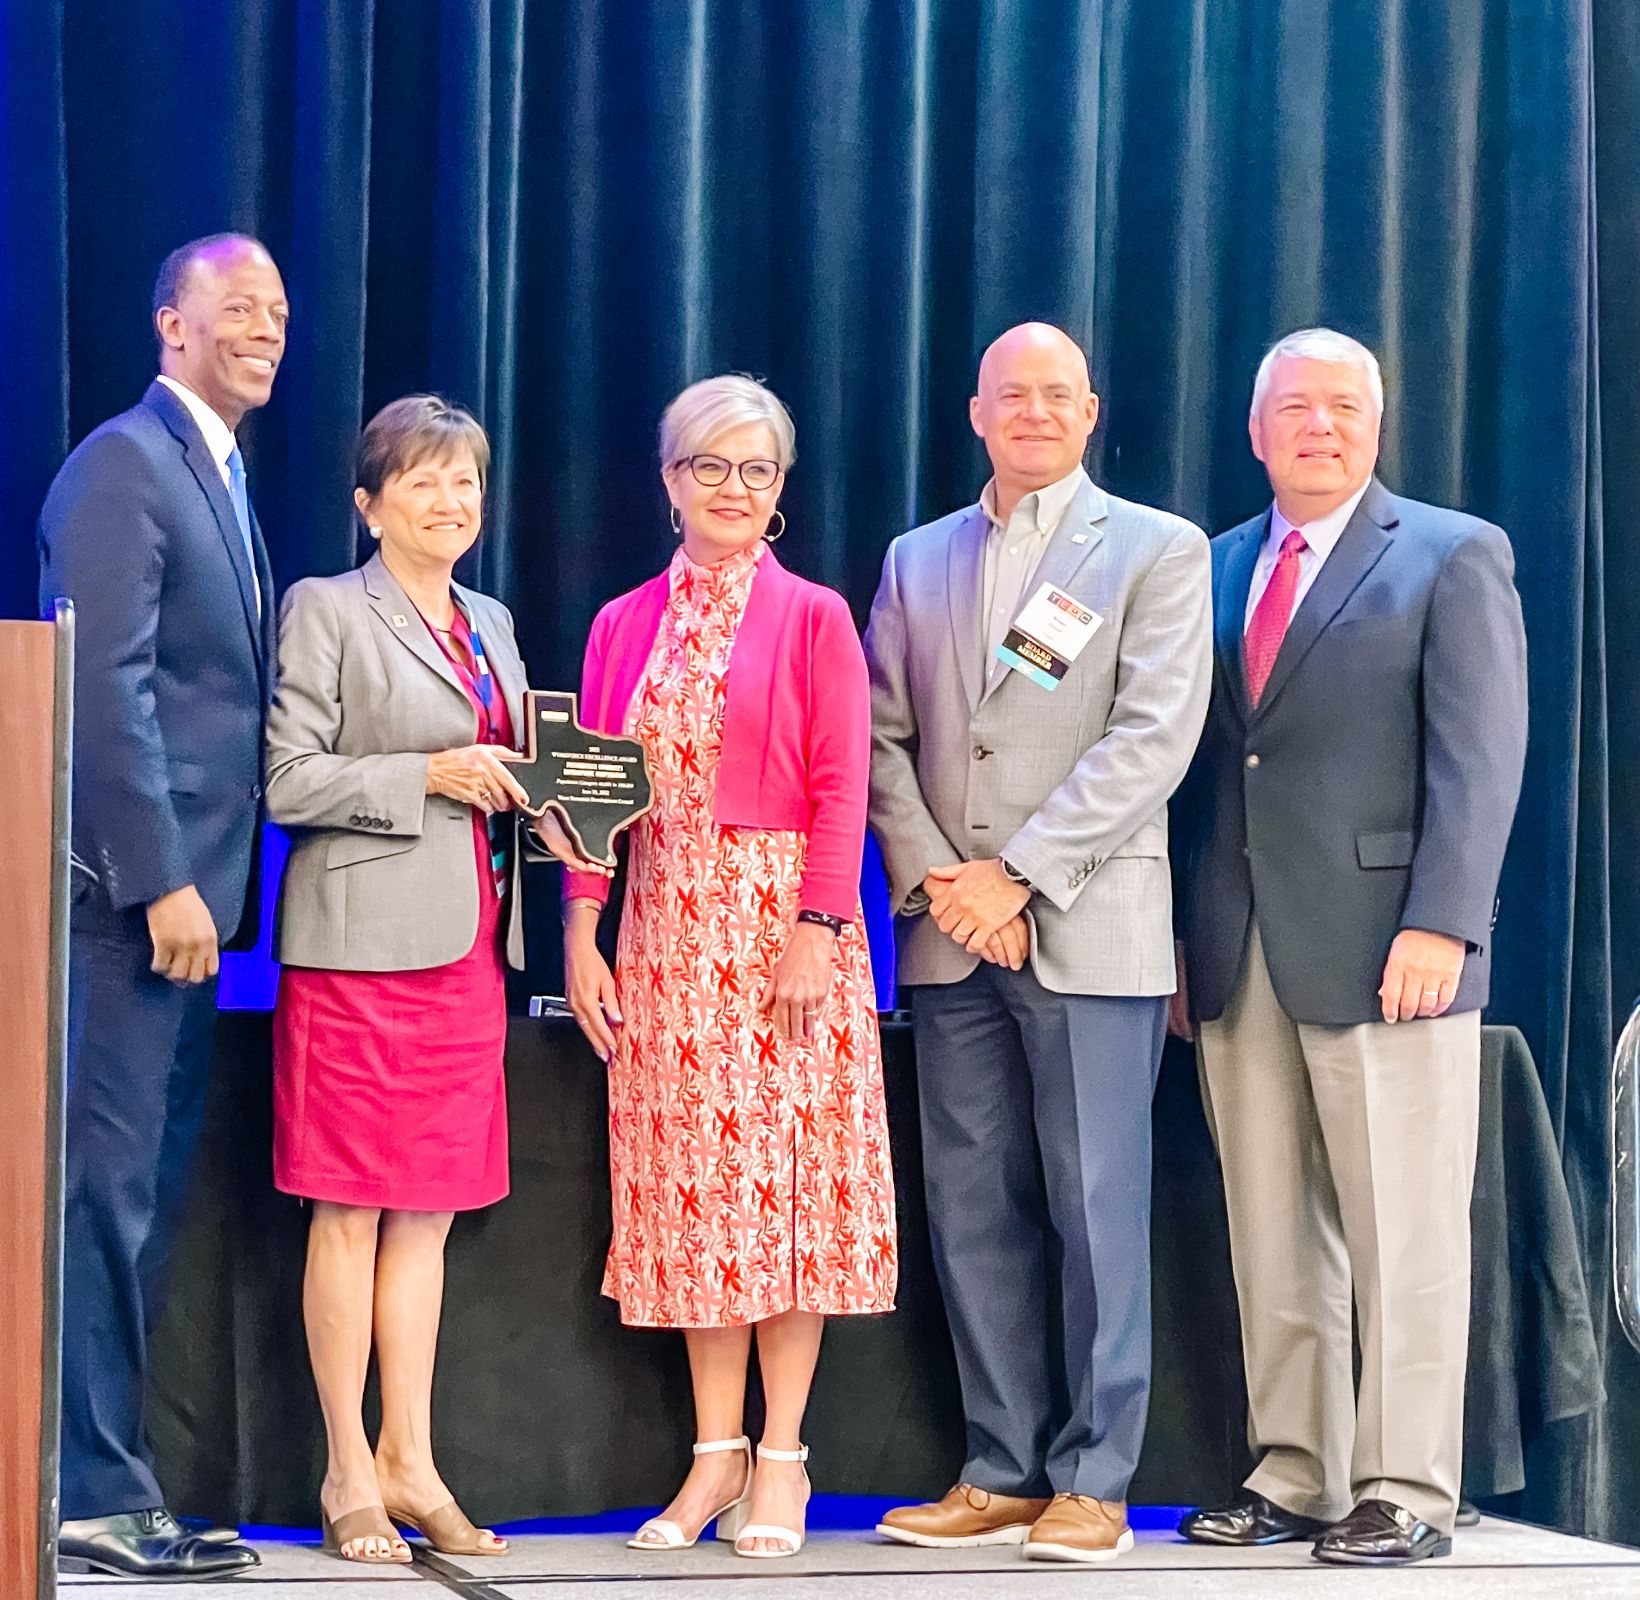 PFLUGERVILLE COMMUNITY DEVELOPMENT CORP. RECEIVES AWARD FOR WORKFORCE EXCELLENCE Main Photo